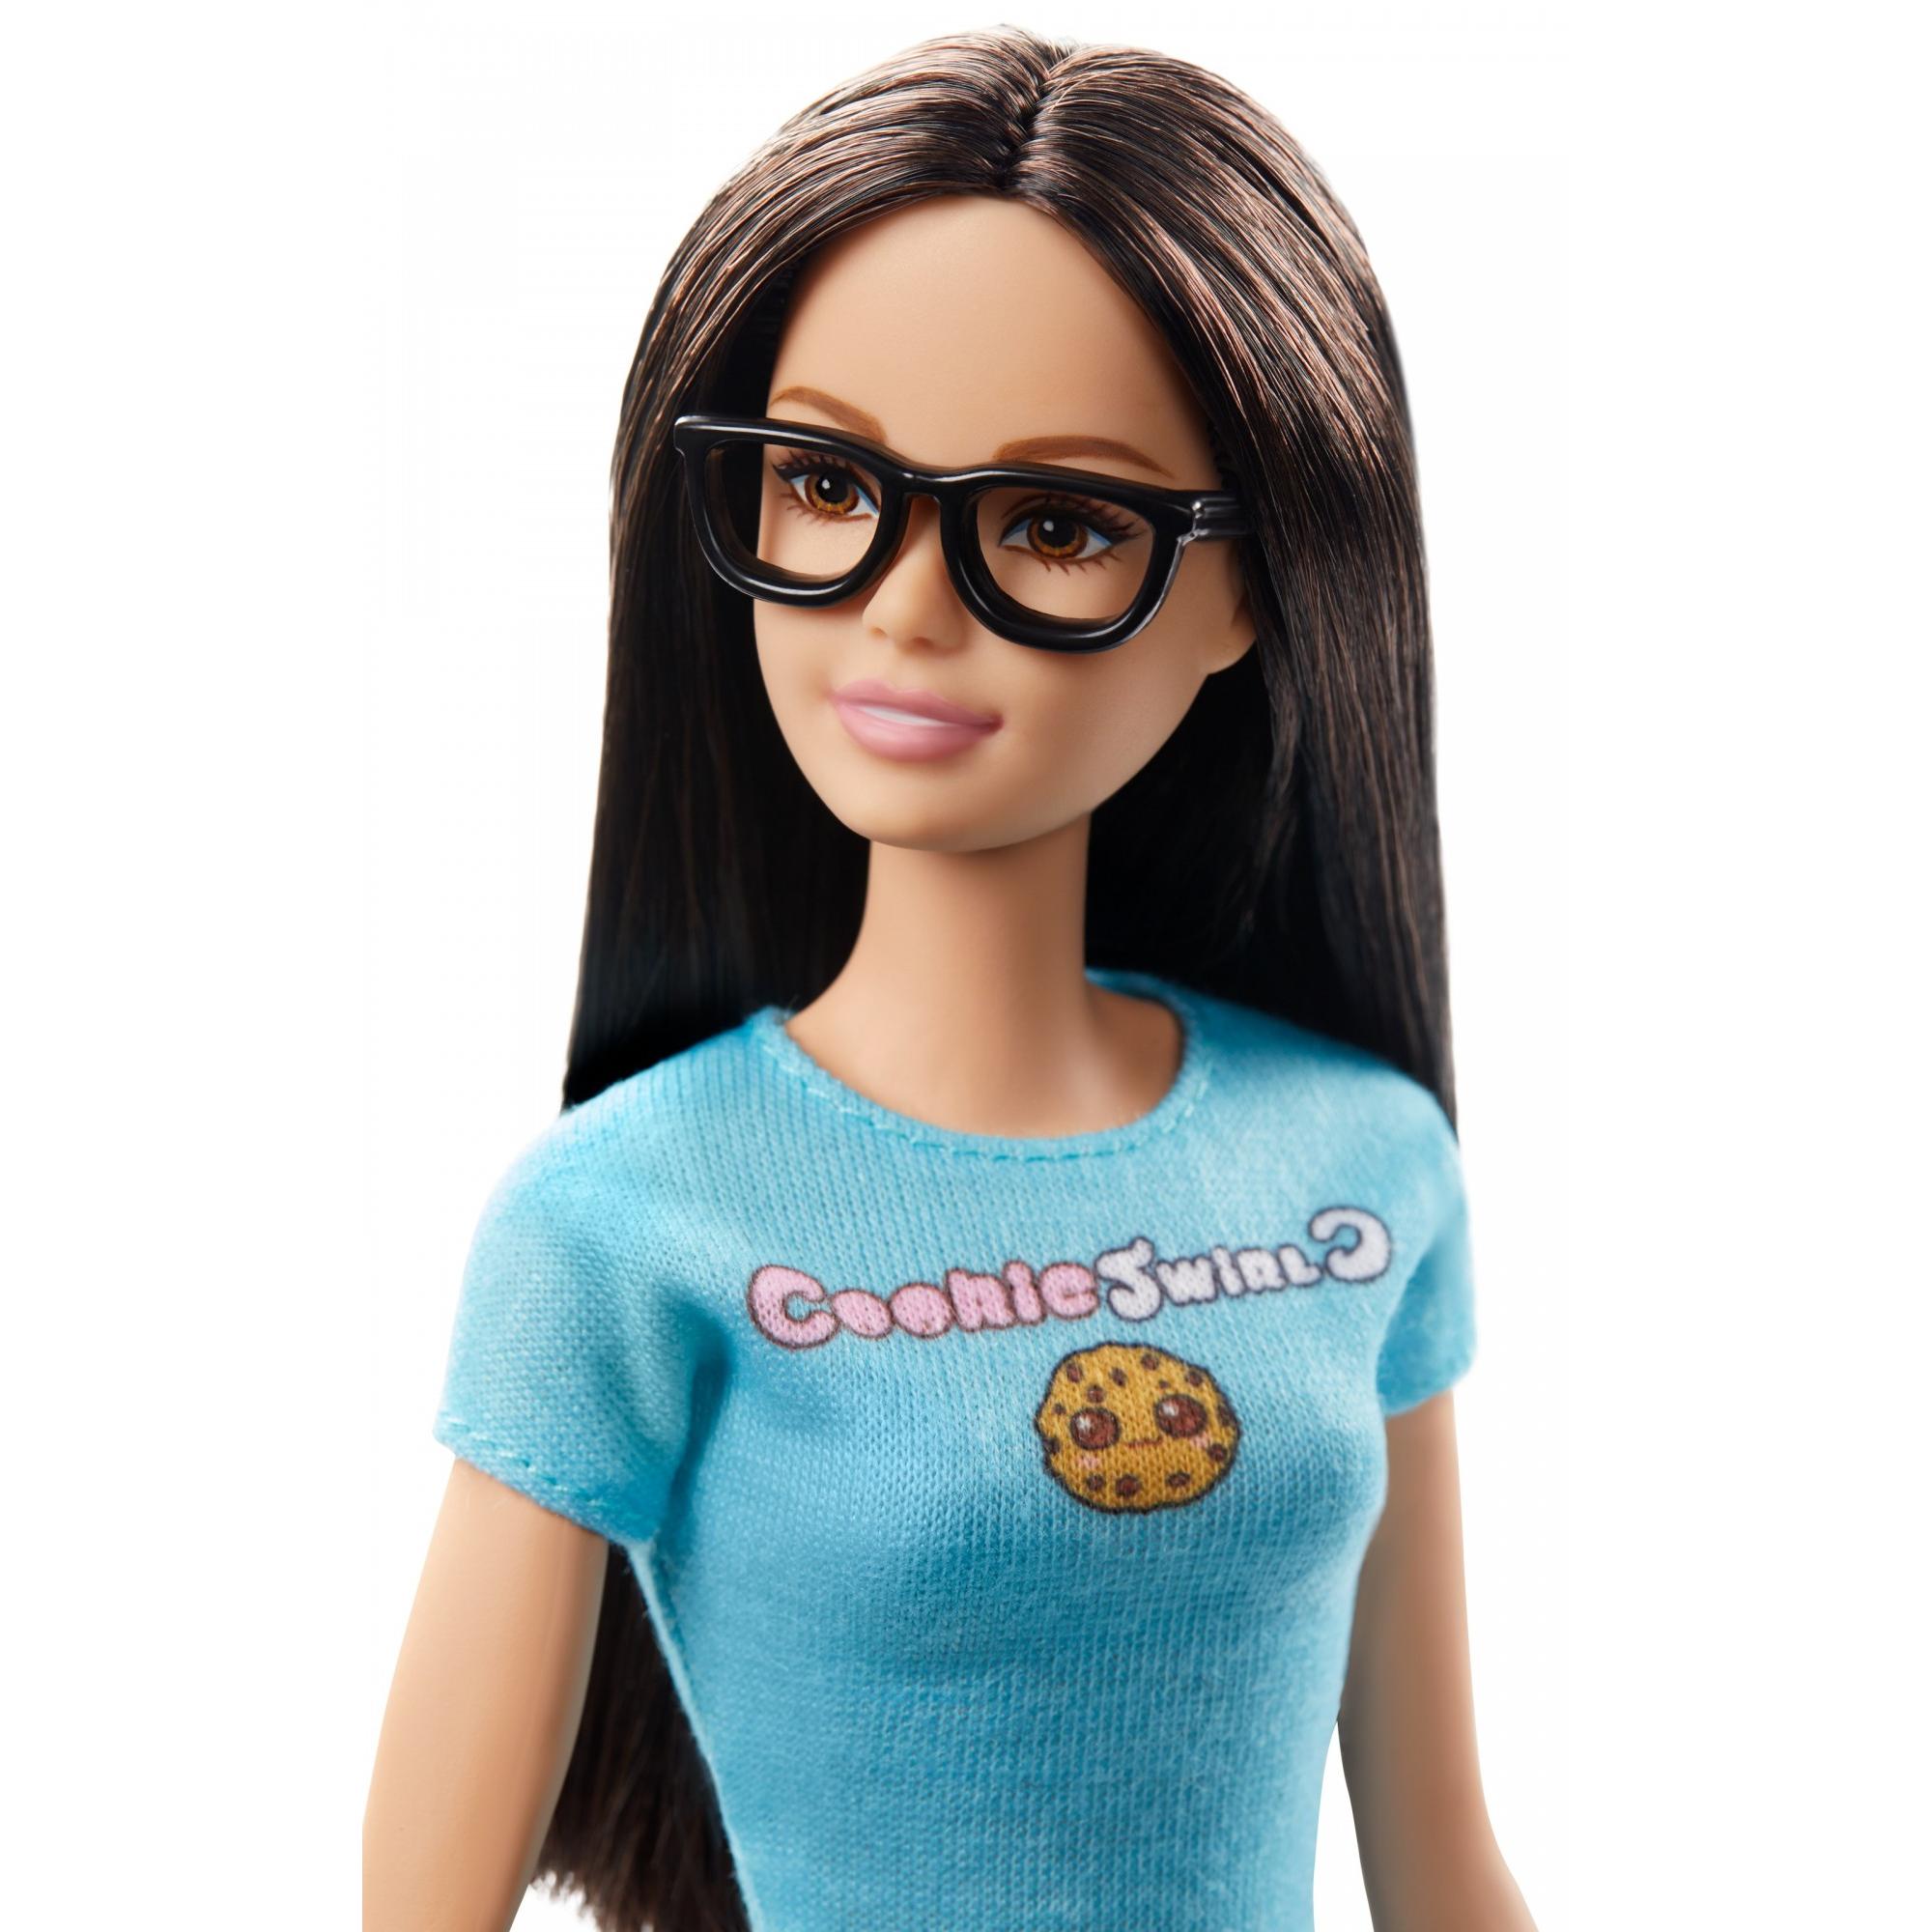 Barbie CookieSwirlC Doll and Accessories - image 2 of 6